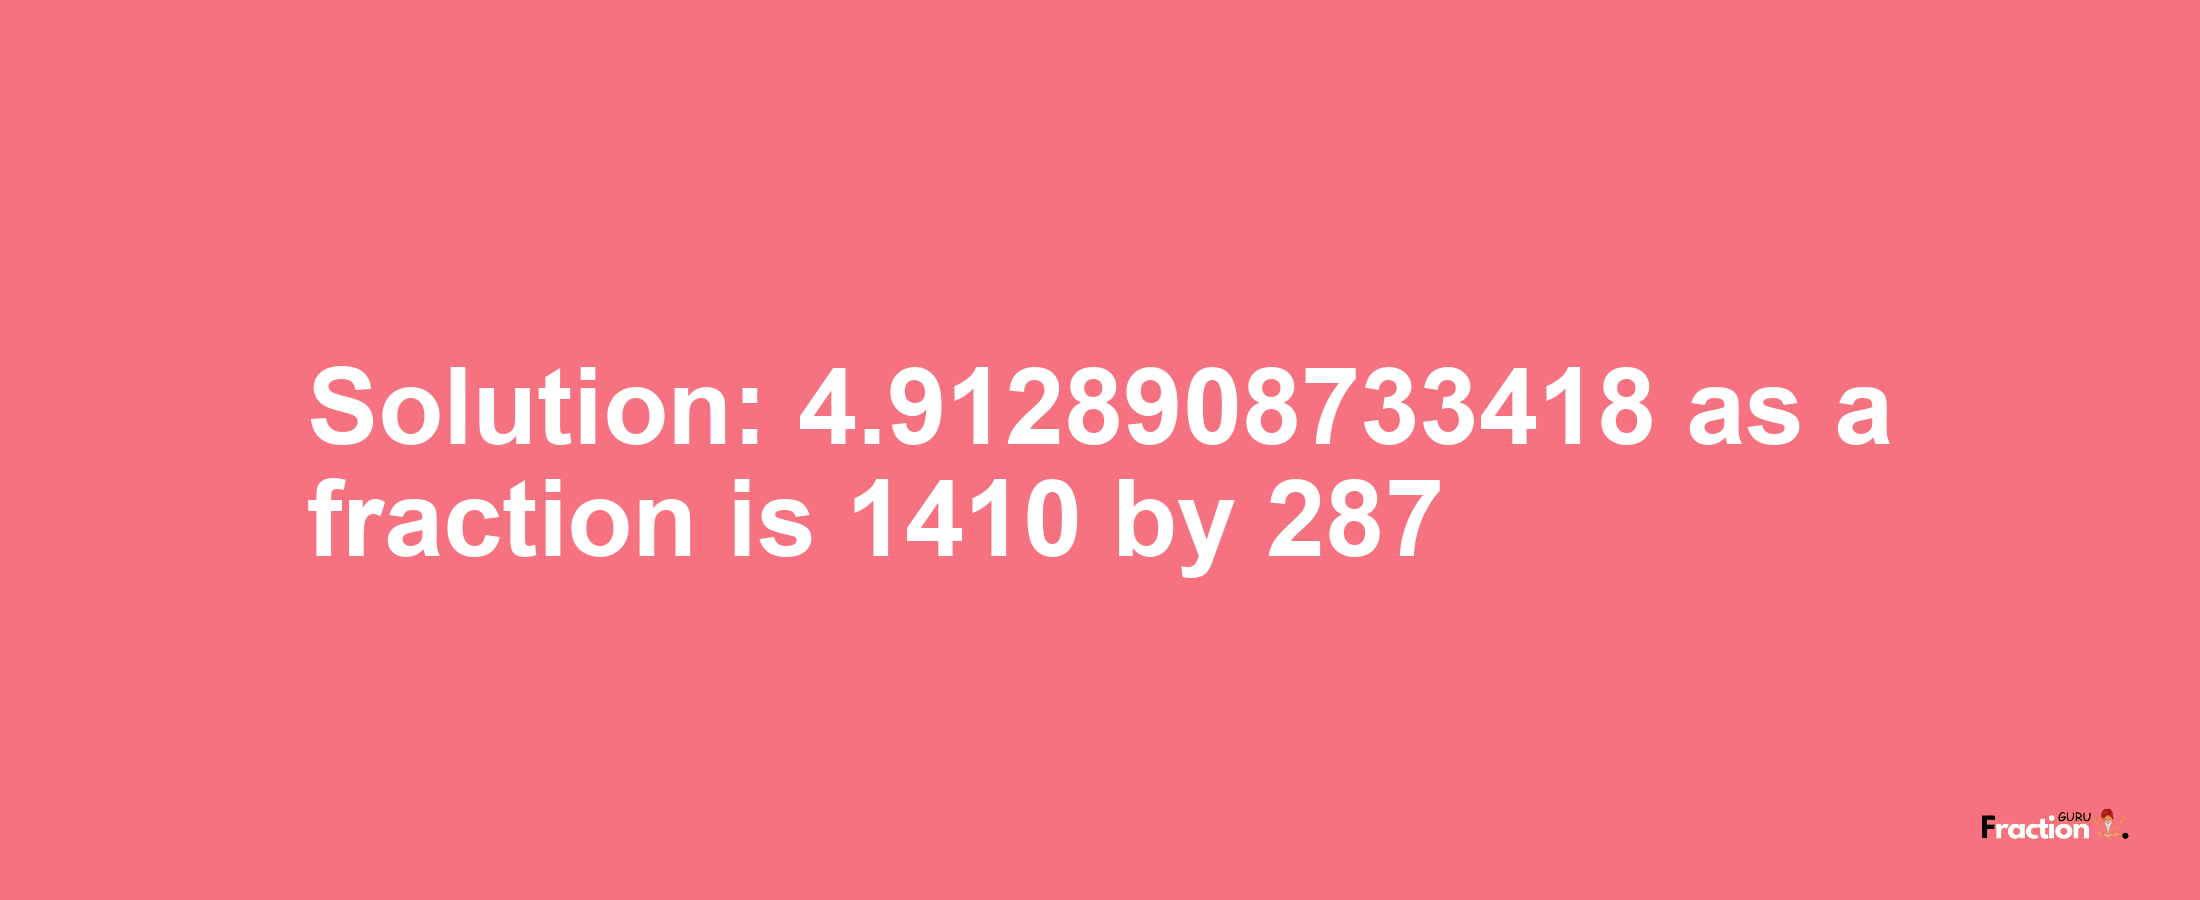 Solution:4.9128908733418 as a fraction is 1410/287